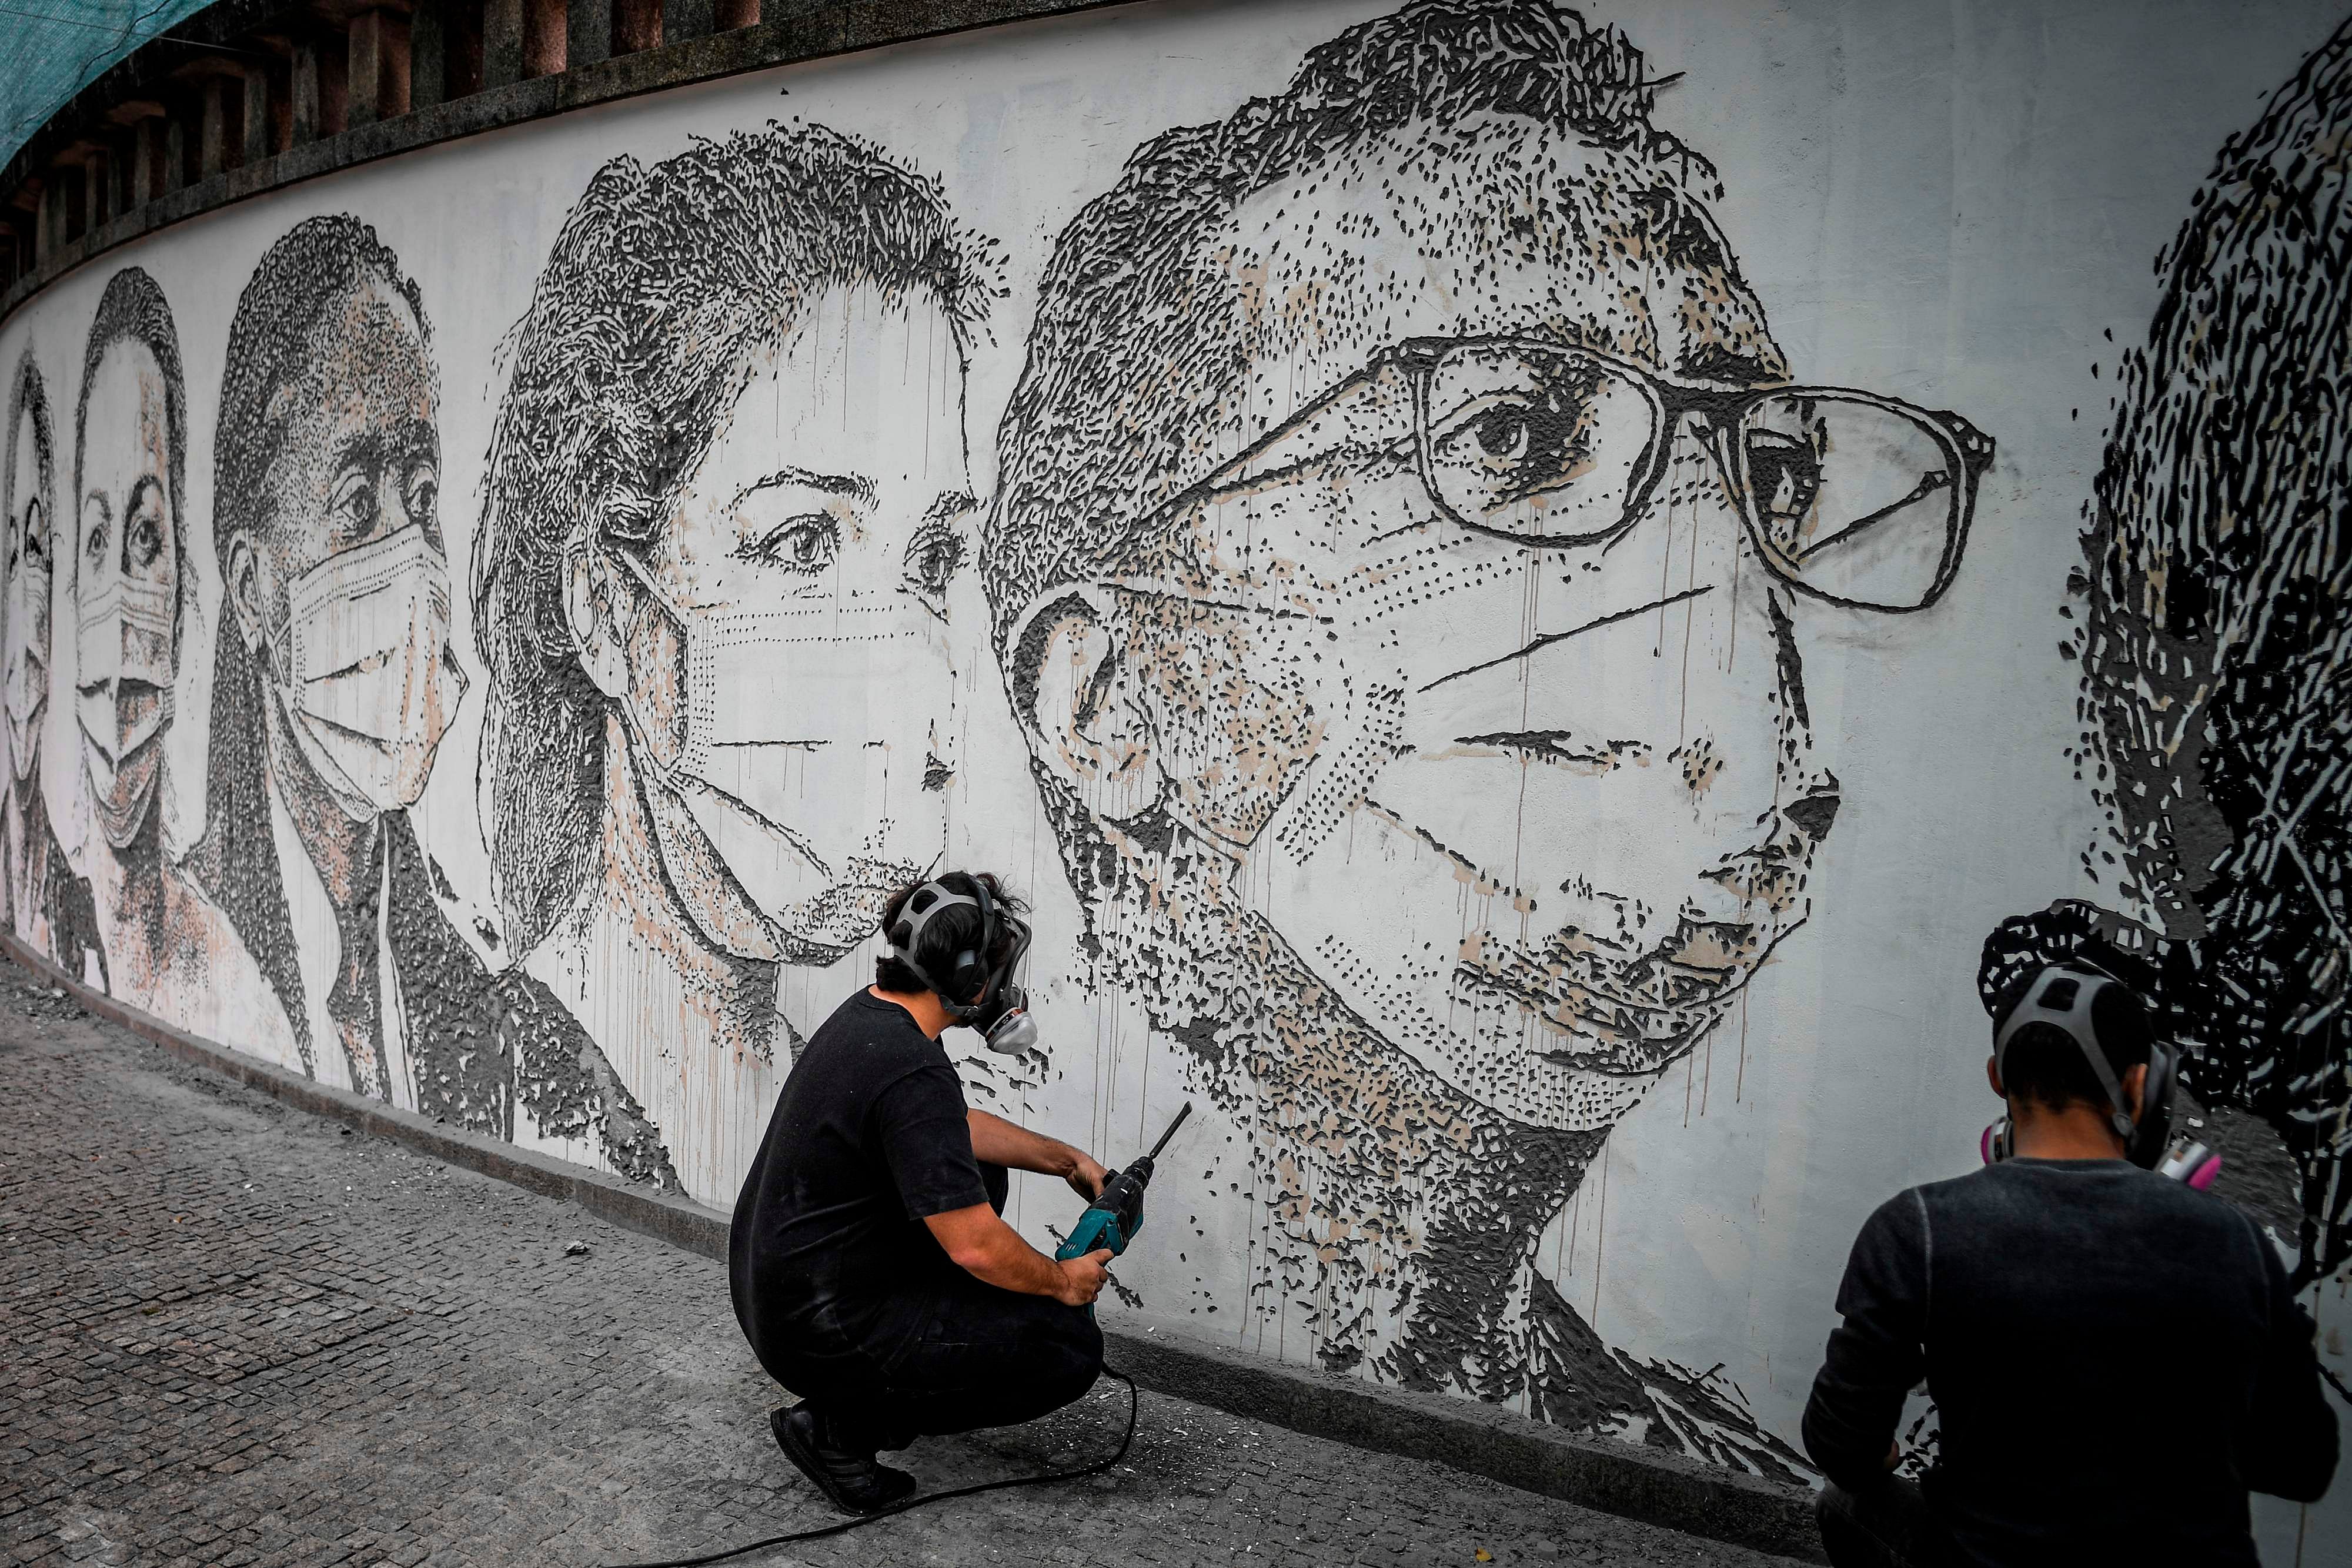 Portuguese artist Alexandre Farto aka Vhils works in his mural depicting healthcare workers' faces carved on a wall of Sao Joao Hospital in Porto on June 17, 2020. - Vhils unveiled on June 19, 2020 this carving-graffiti artwork at the Sao Joao hospital that pays tribute to the health professionals who were at the frontline fighting the novel coronavirus outbreak. (Photo by AFP)